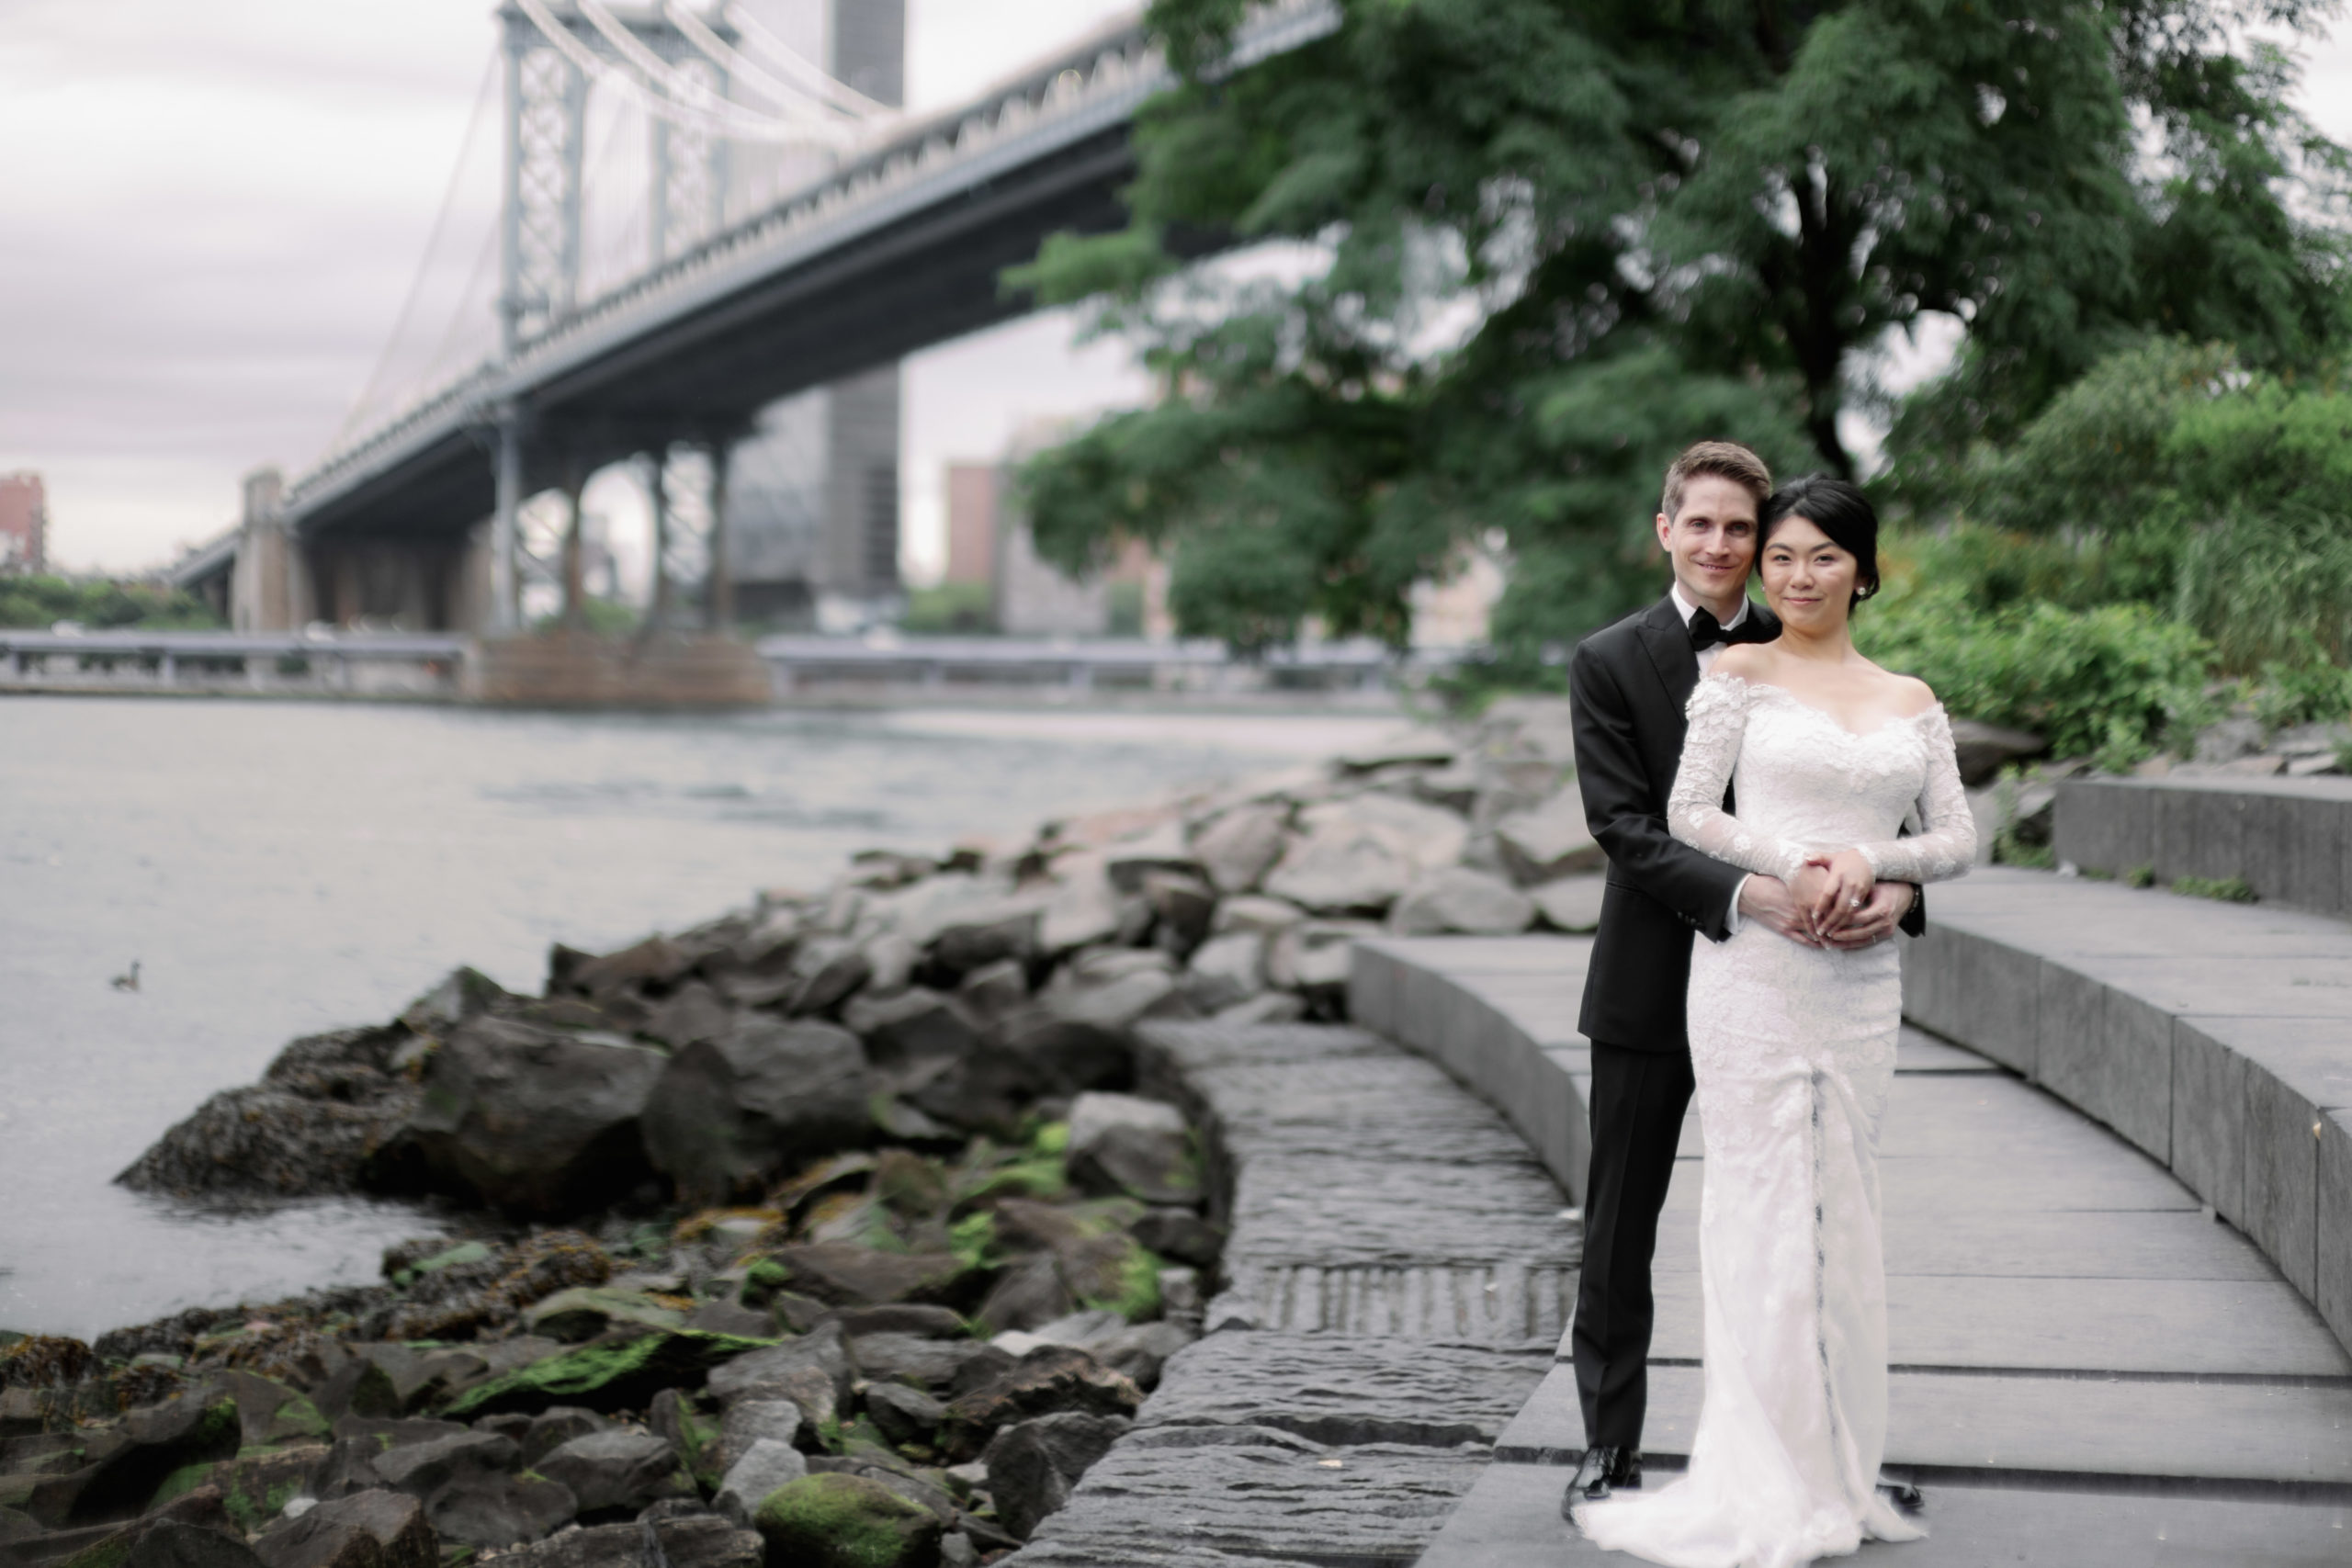 The newlyweds are standing in Brooklyn Bridge Park with the Brooklyn Bridge in the background. Image by Jenny Fu Studio